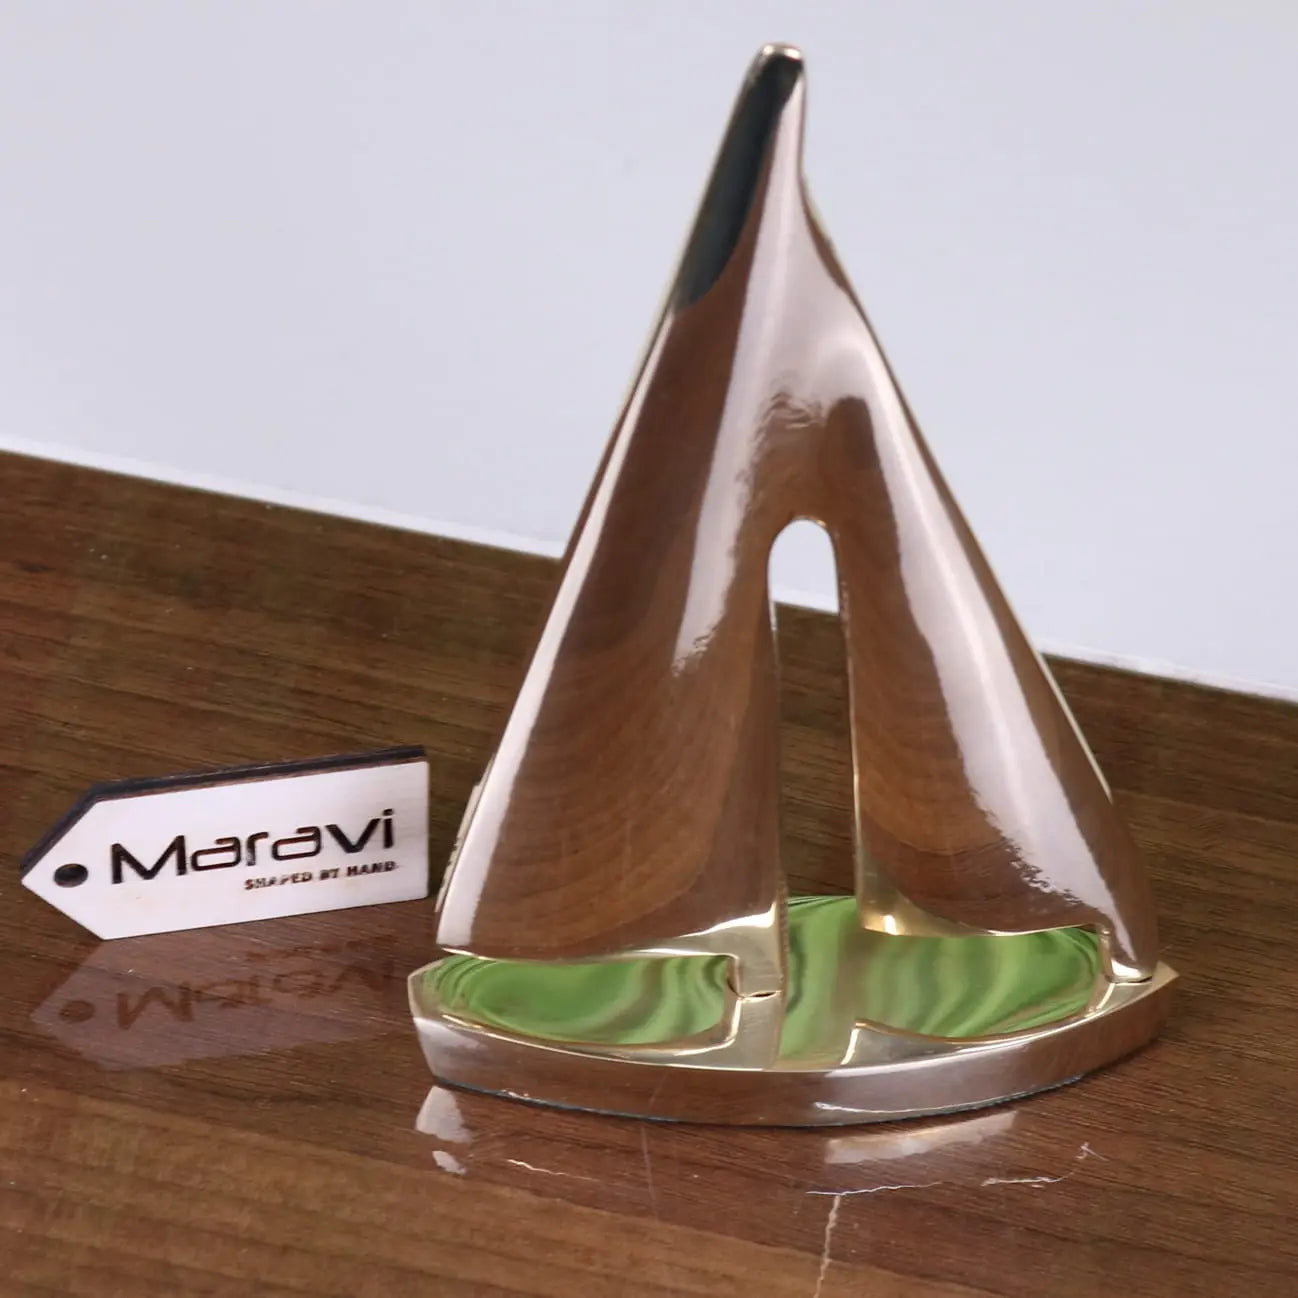 Nabha Brass Yacht Boat Model Ornament - Front View